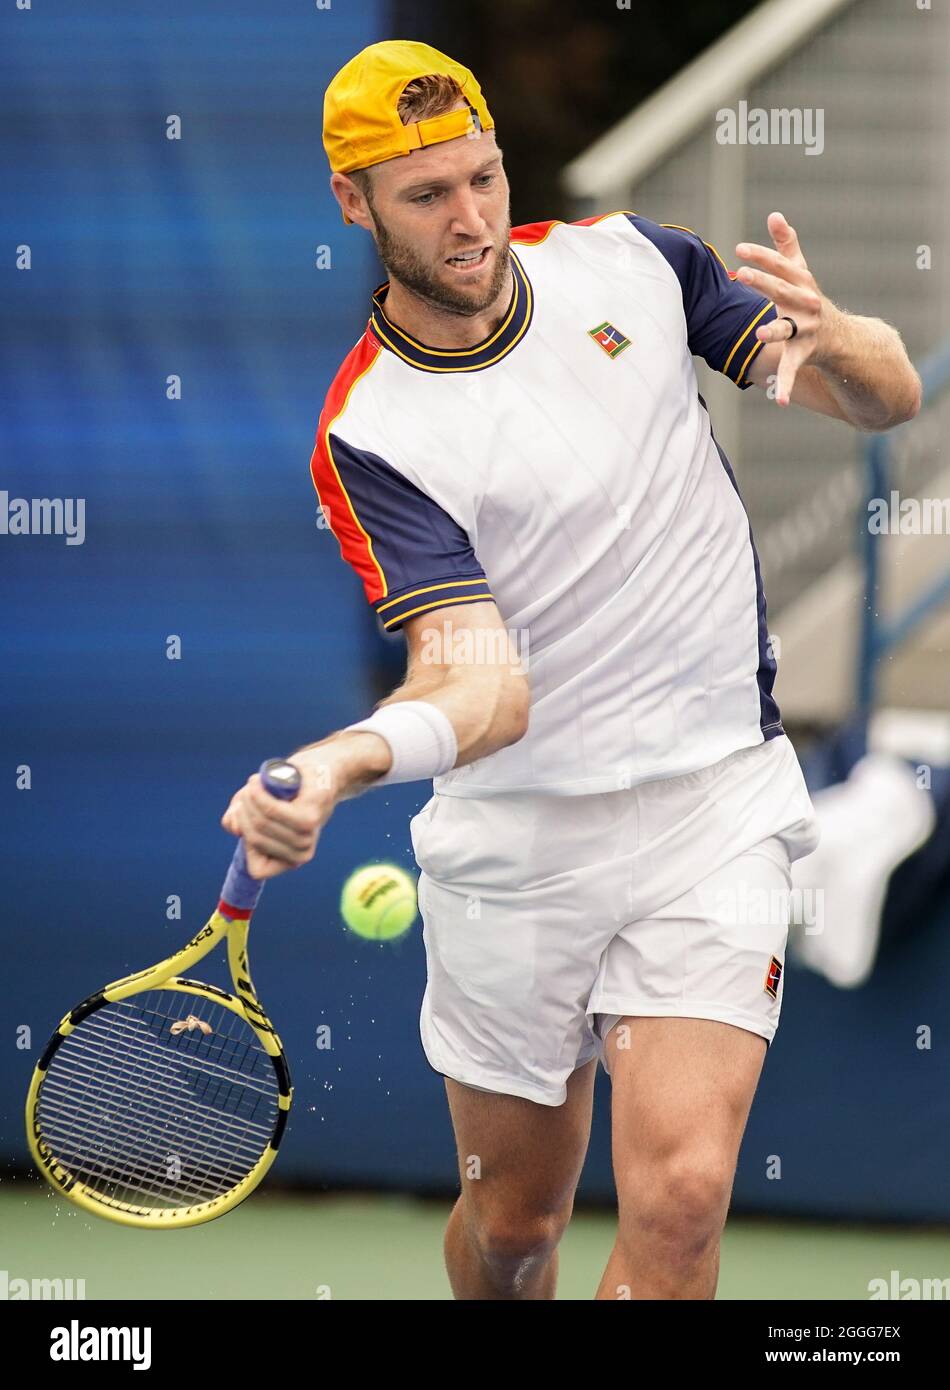 New York, United States. 31st Aug, 2021. Jack Sock of the USA hits a  forehand to Yoshihito Nishioka of Japan in the second set of their first  round match held on Court